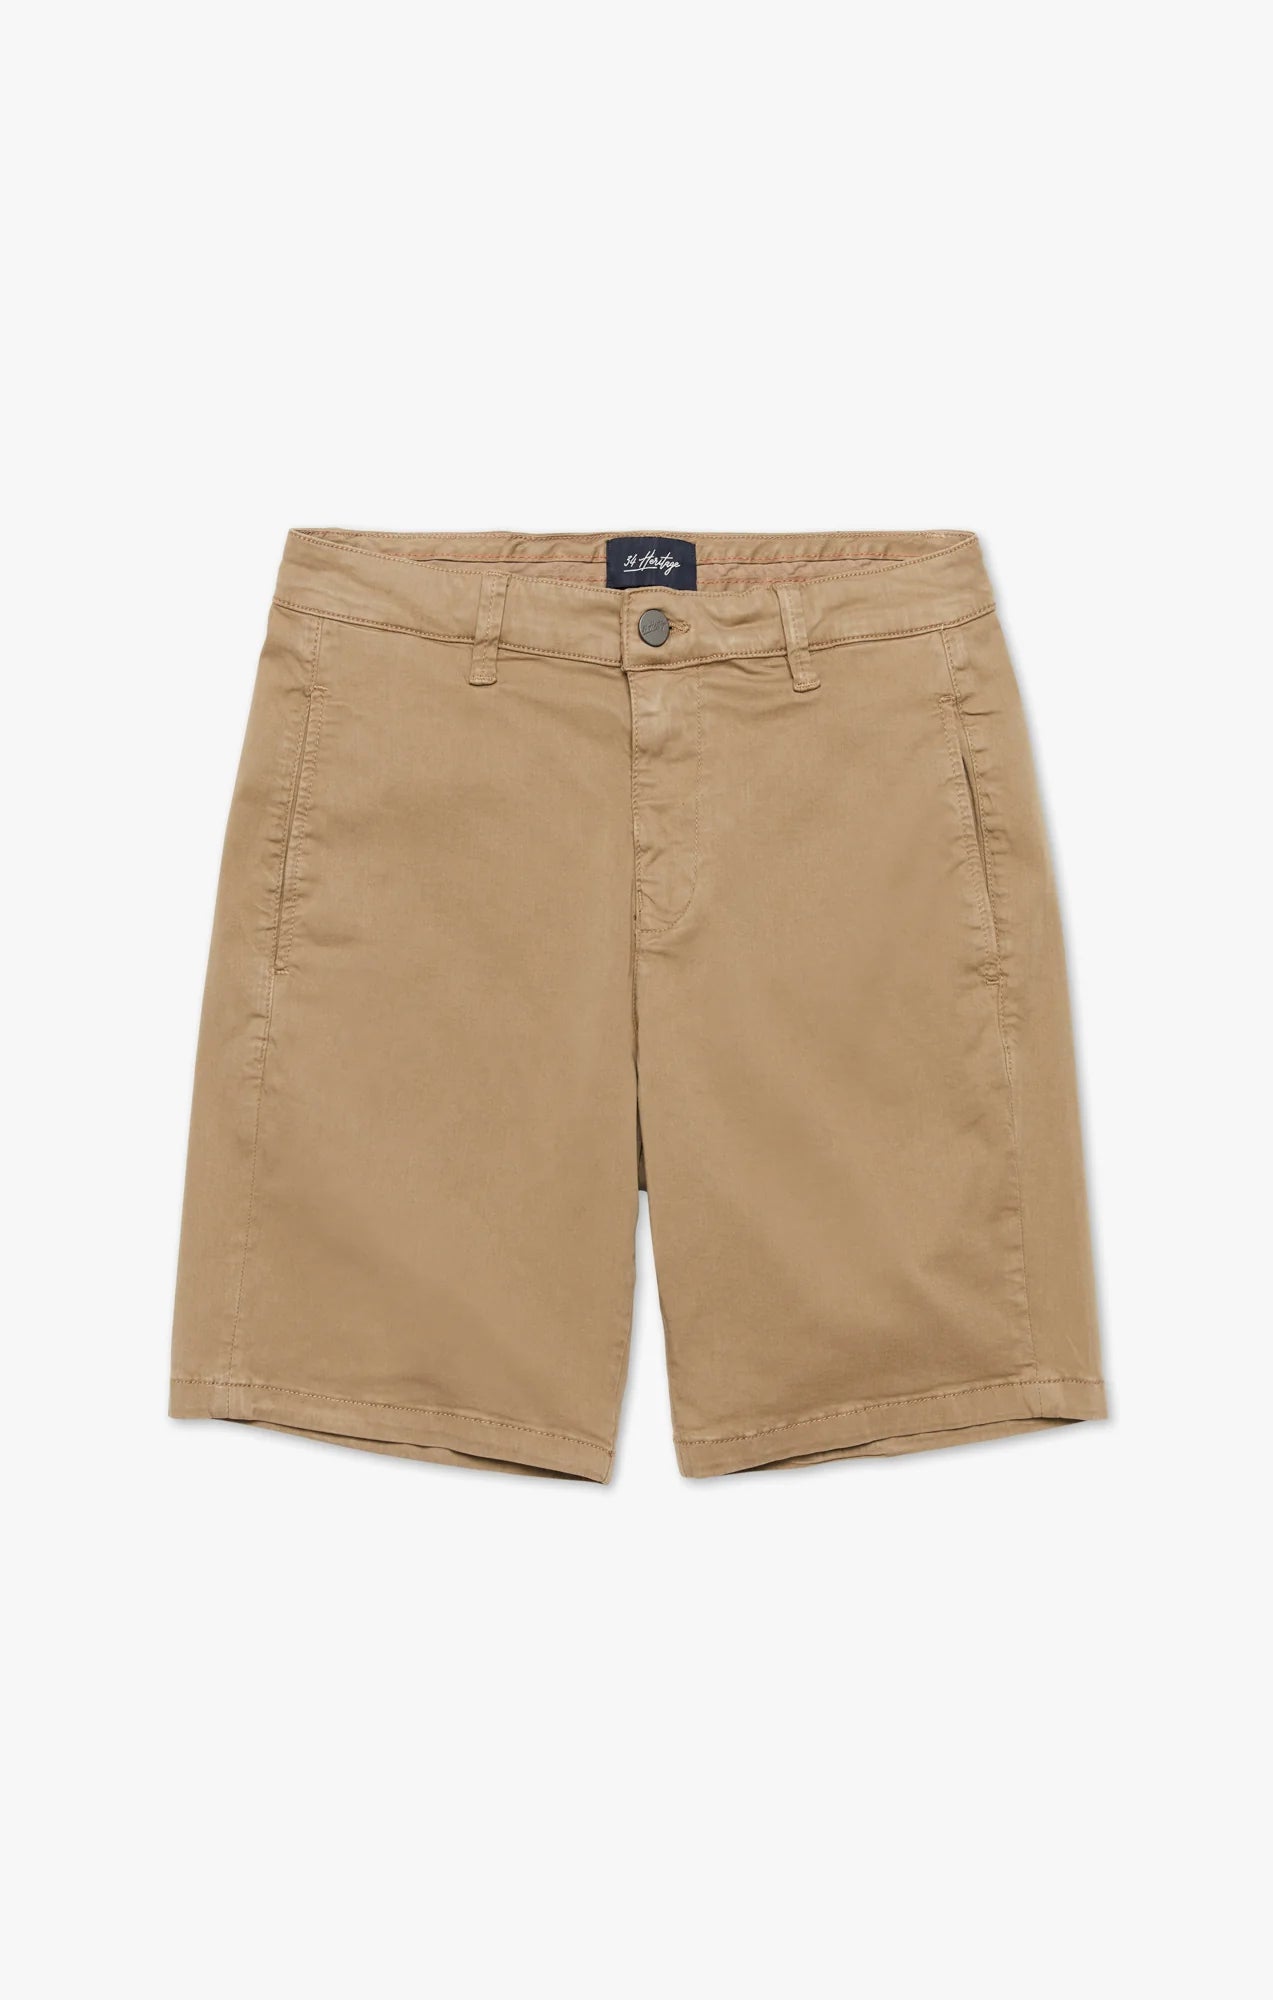 34 Heritage Nevada Shorts in Roasted Cahew Twill